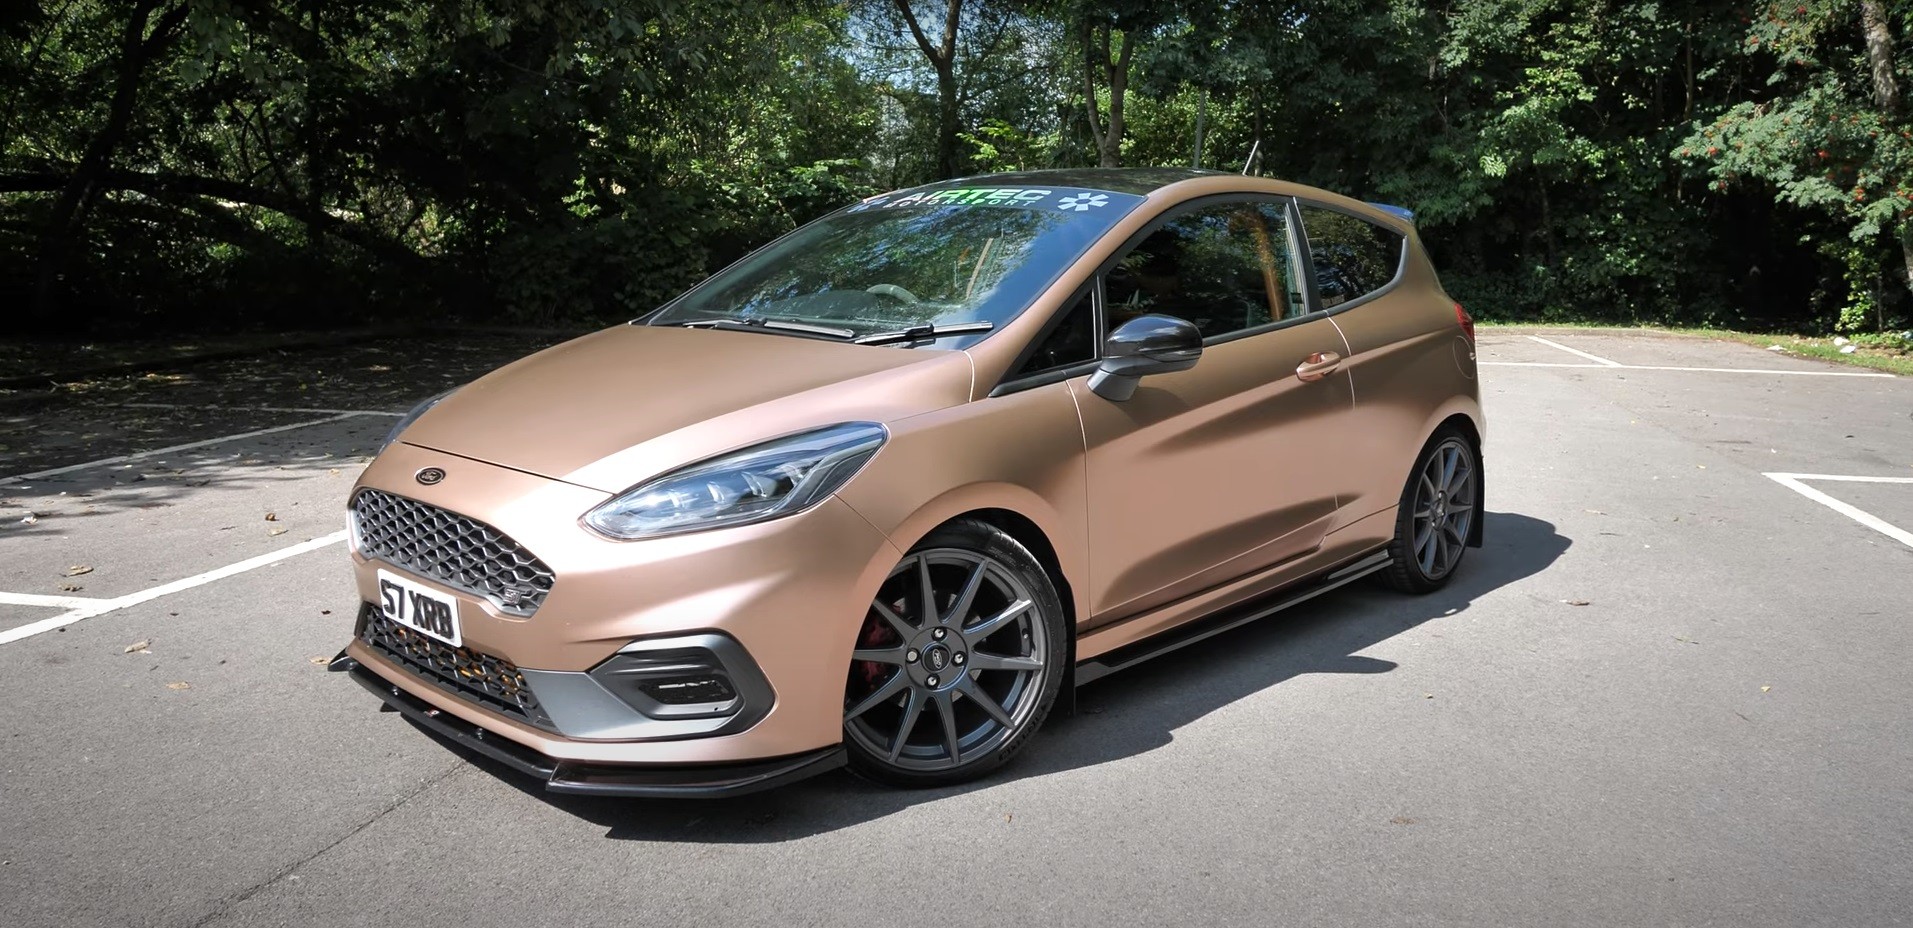 https://s1.cdn.autoevolution.com/images/news/gallery/rachel-s-stage-2-ford-fiesta-st-is-quick-loud-and-of-course-pink-sorry-rose-gold_7.jpg